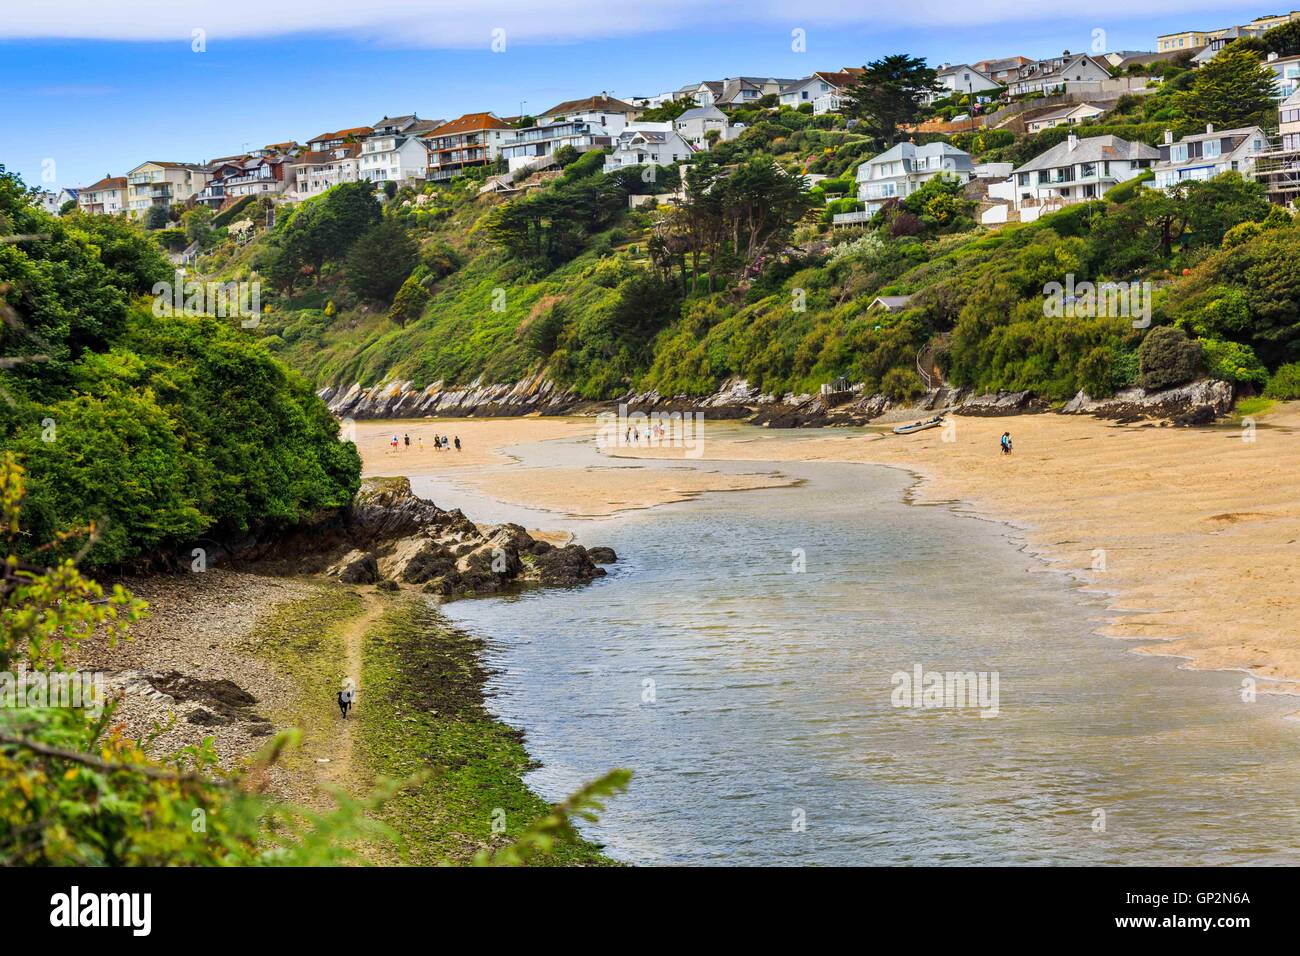 A view of the River Gannel estuary and beach near Newquay in Cornwall, England, UK Stock Photo